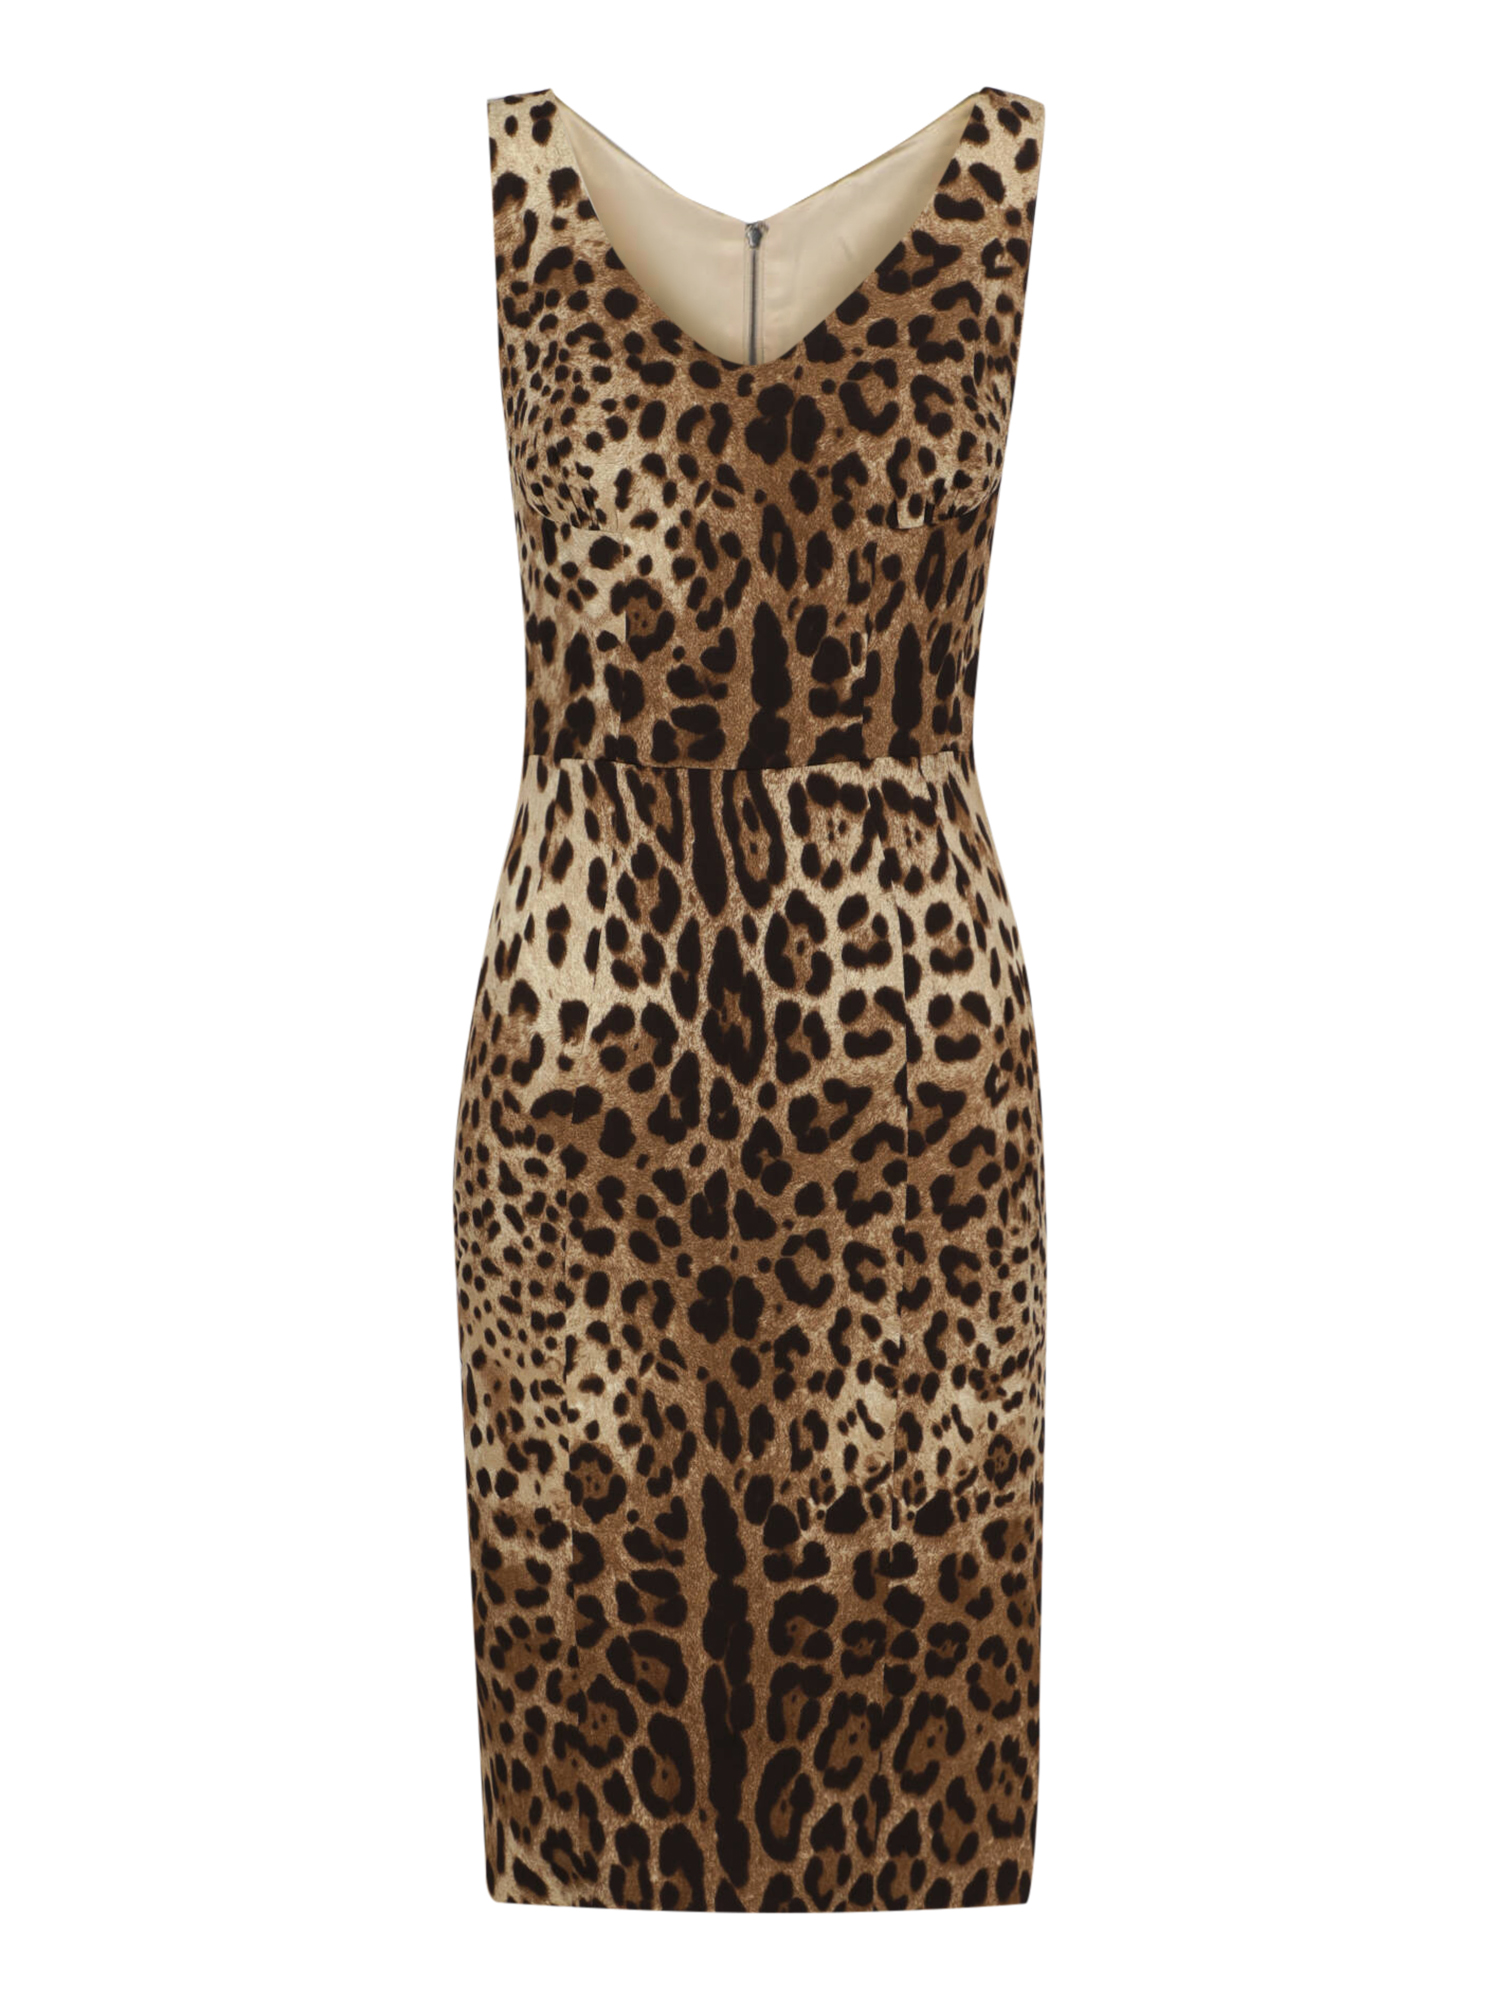 Condition: New With Tag, Animal Print Synthetic Fibers, Color: Beige, Brown - S - IT 40 -